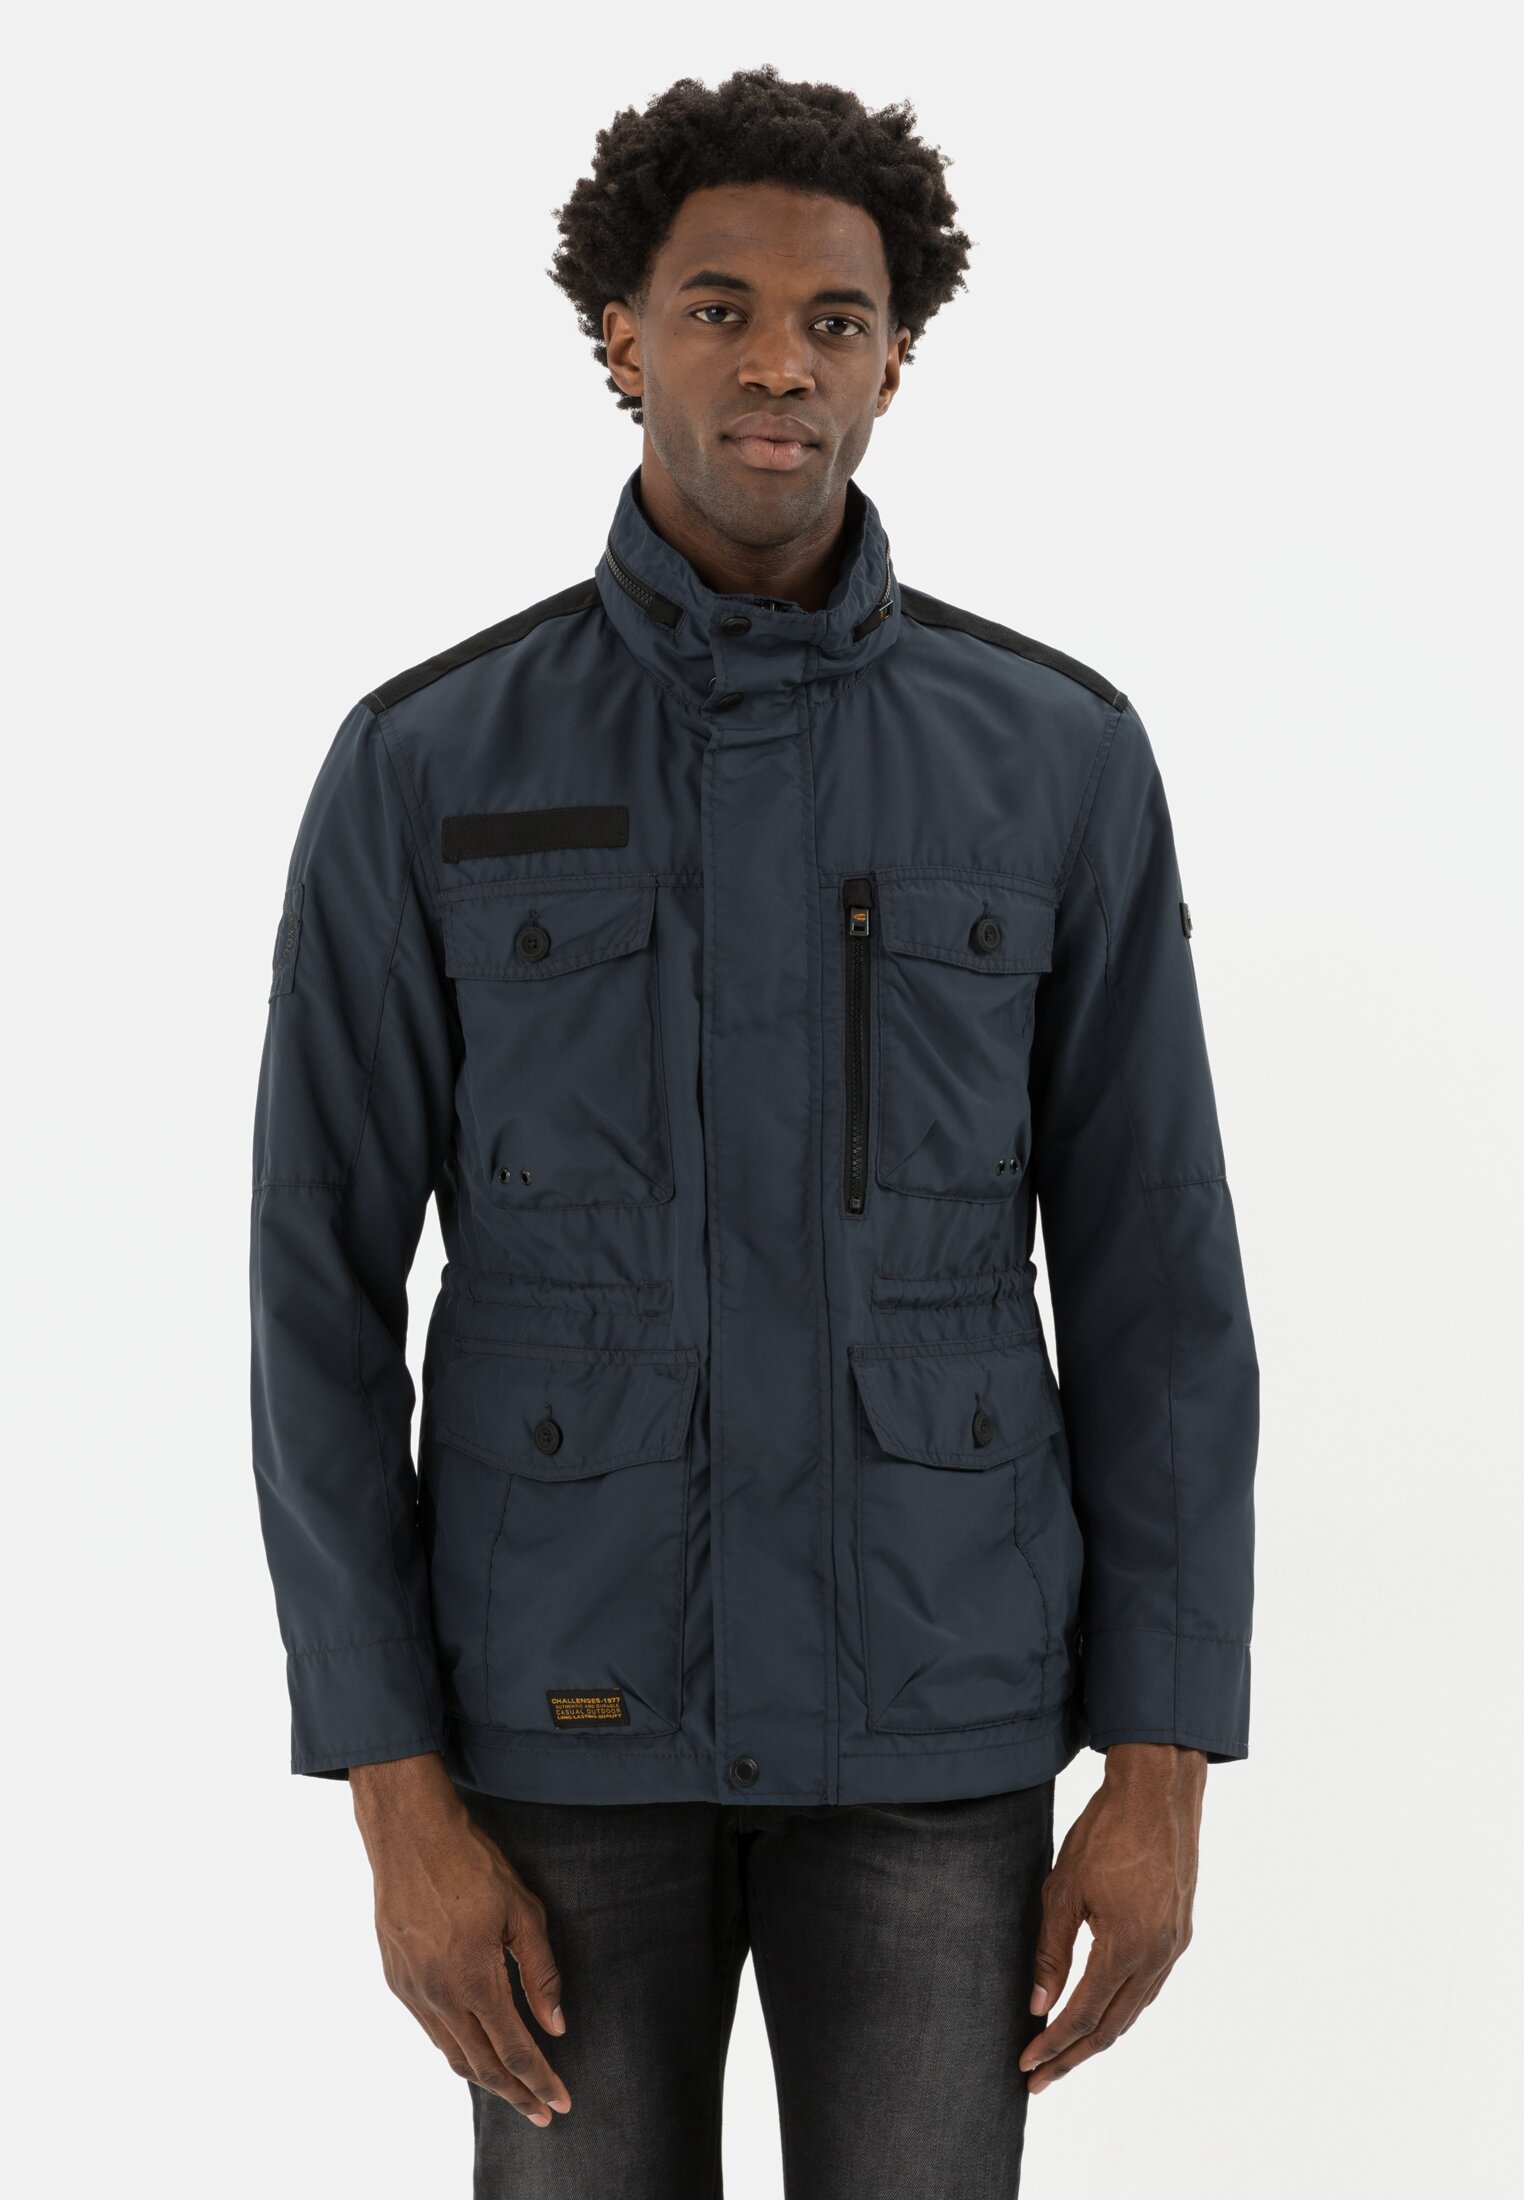 Camel Active Multi-Pocket Jacket with recycled Polyester